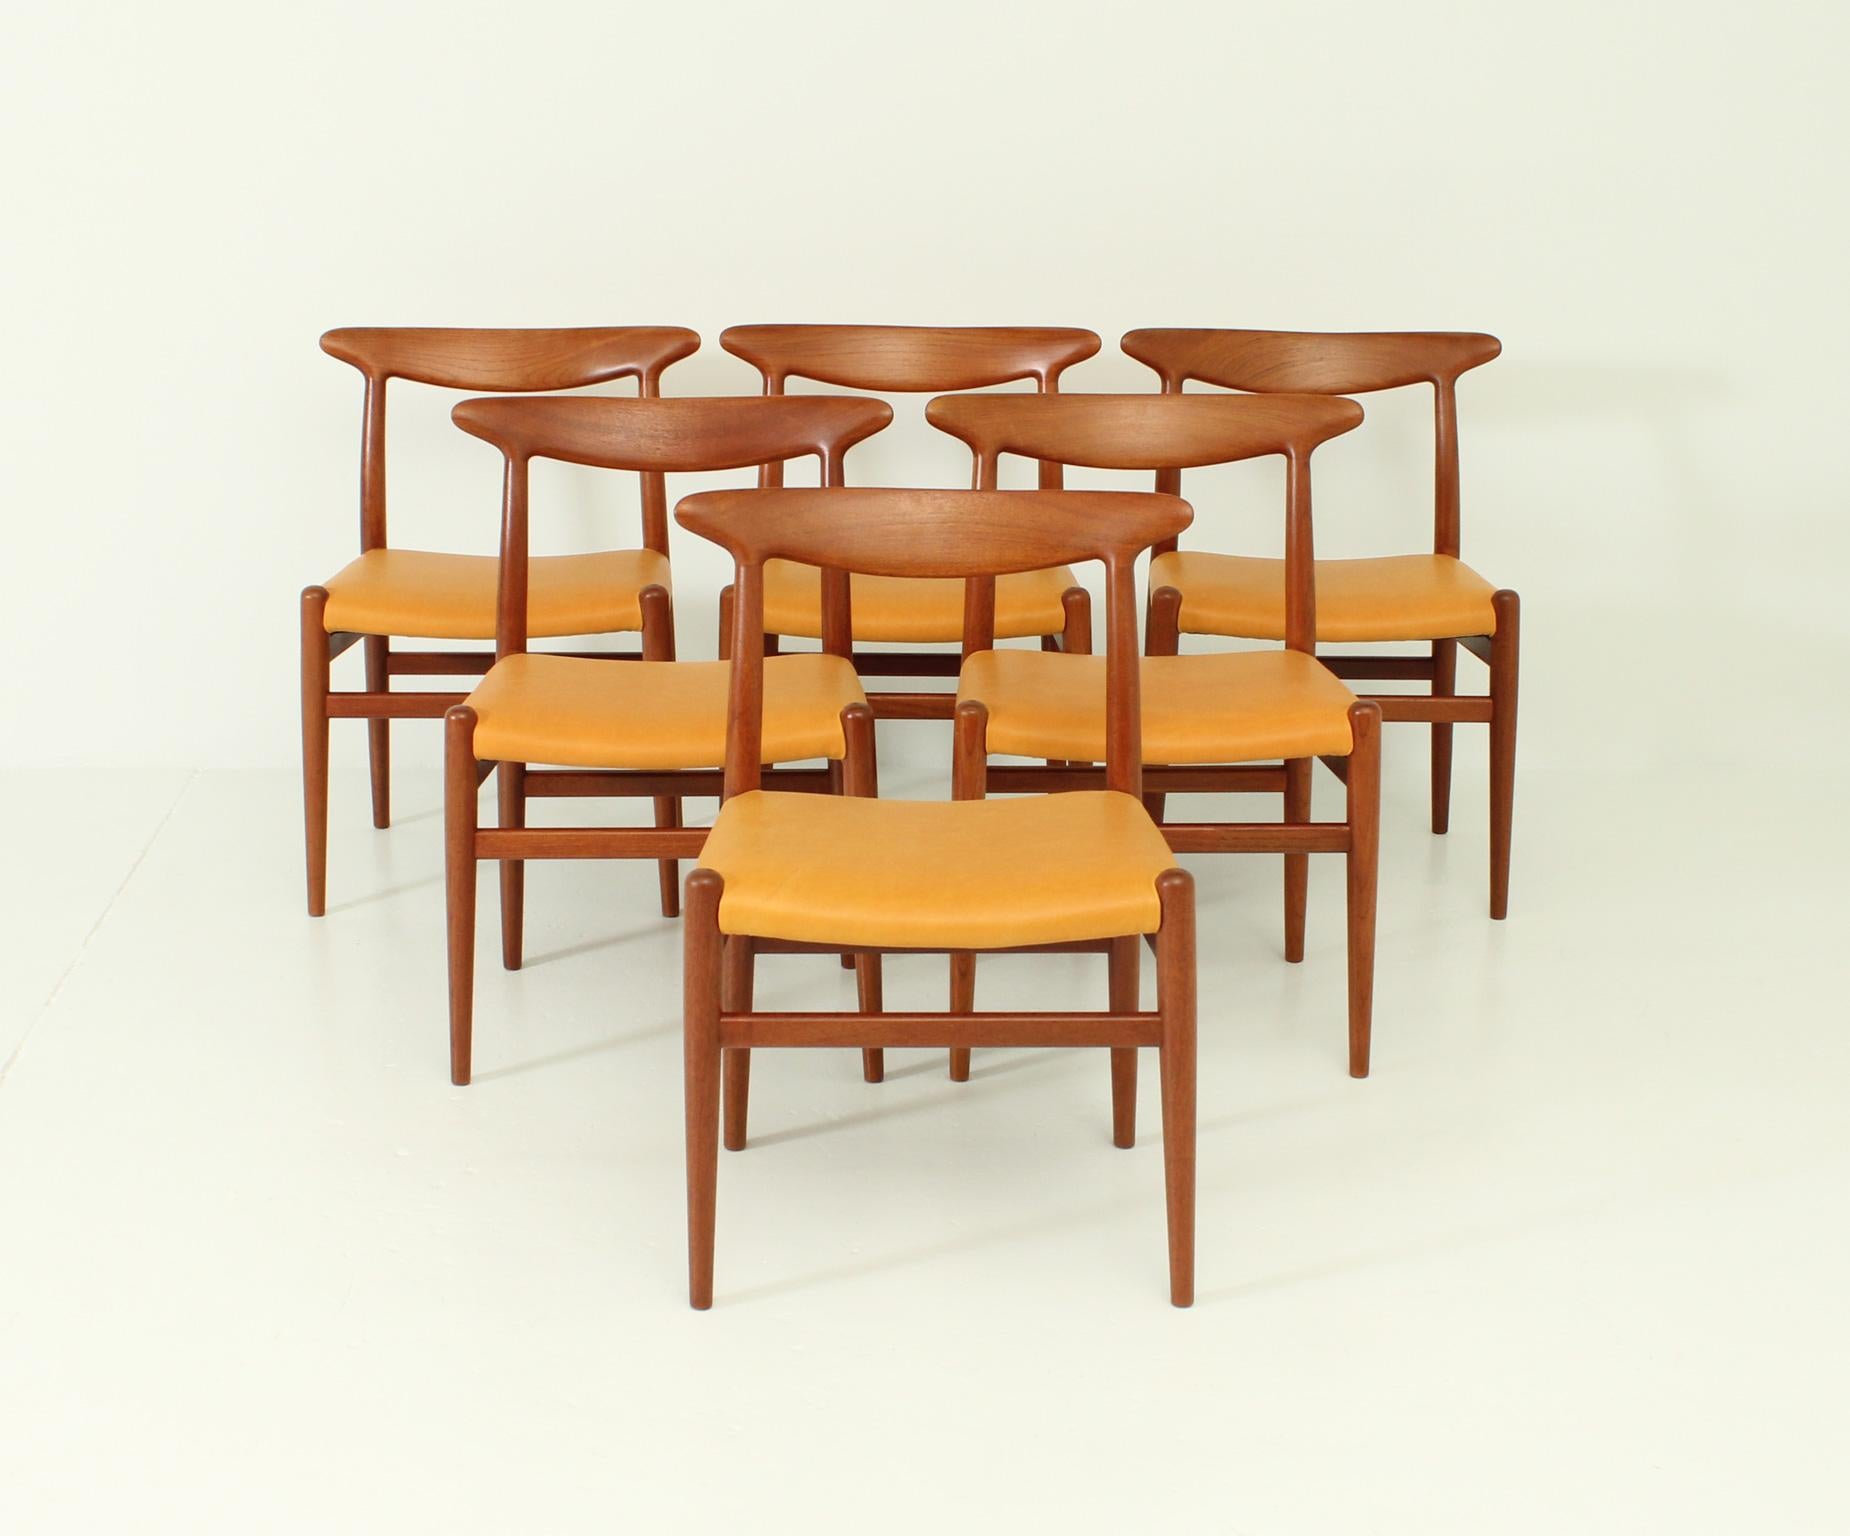 Set of six W2 chairs designed in 1953 by Hans Wegner for C. M. Madsen, Denmark. Solid teak wood and new upholstery with tan leather.